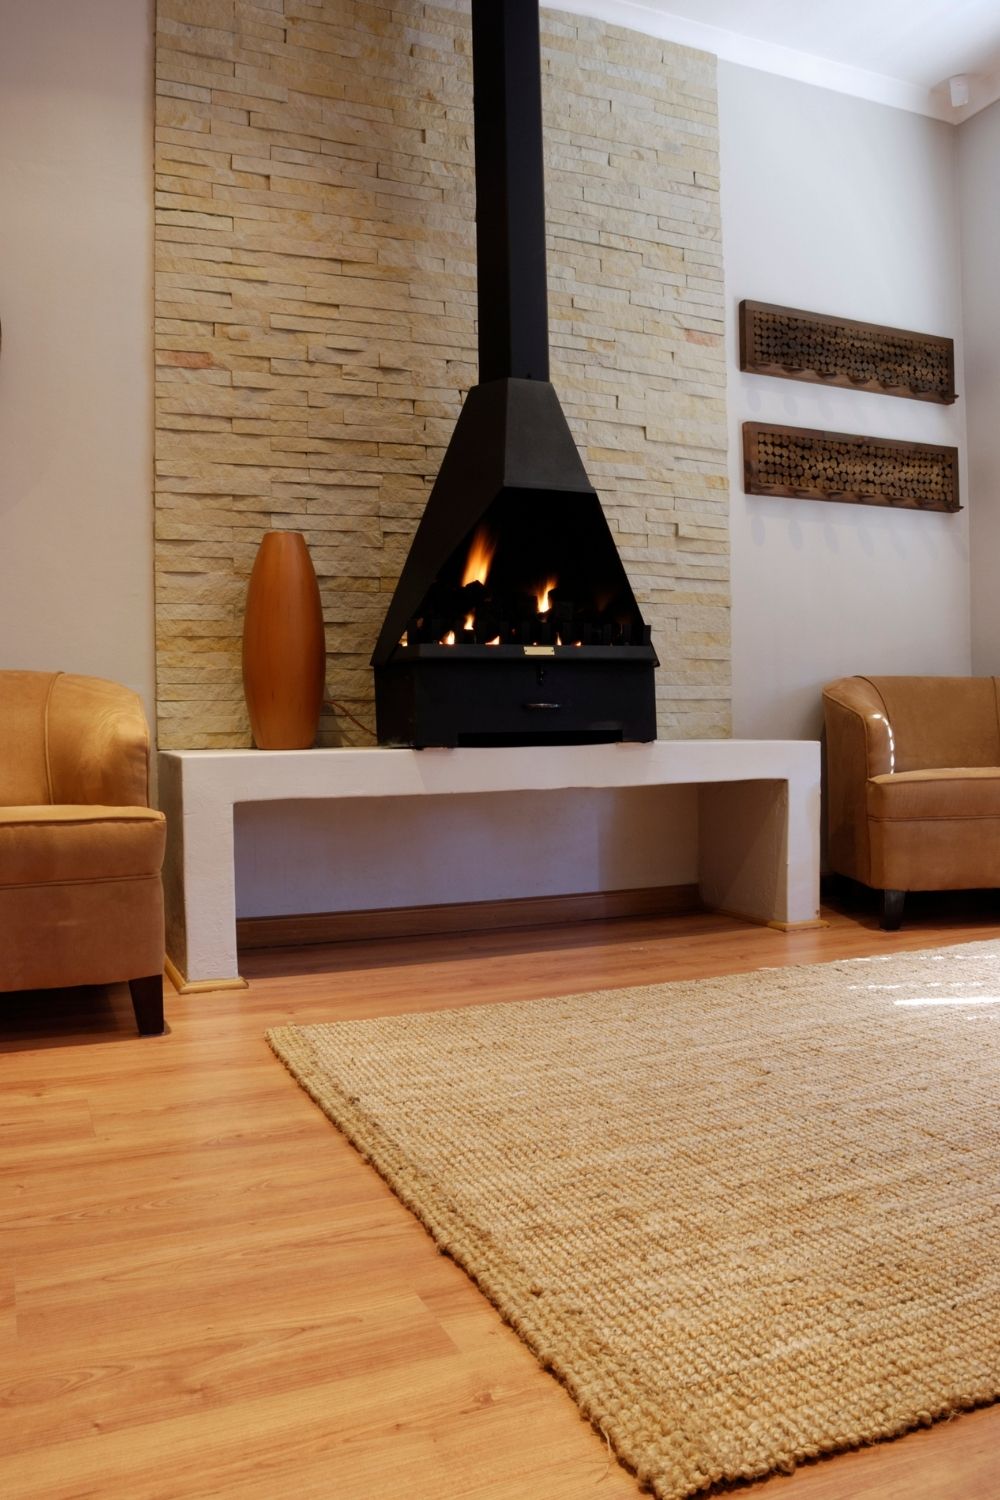 Install an ethanol fireplace in the living room